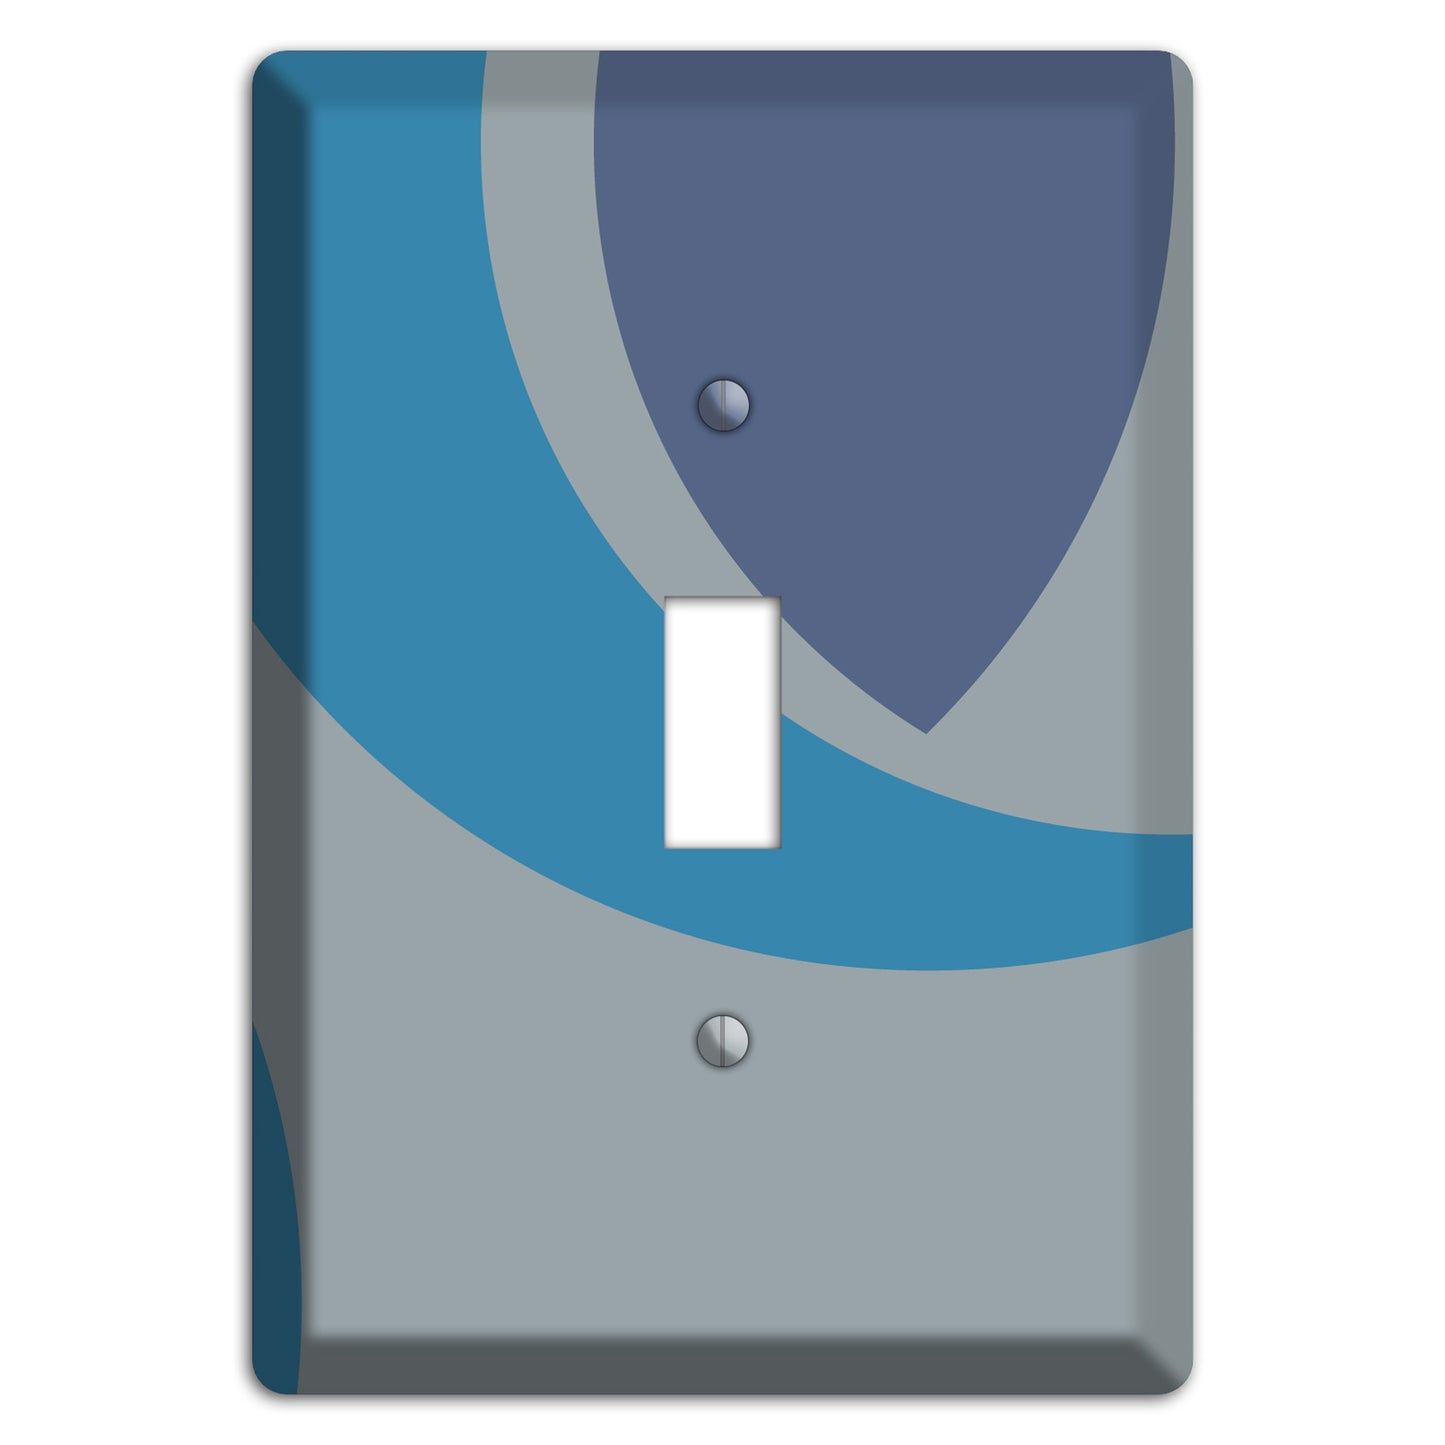 Grey and Blue Abstract Cover Plates